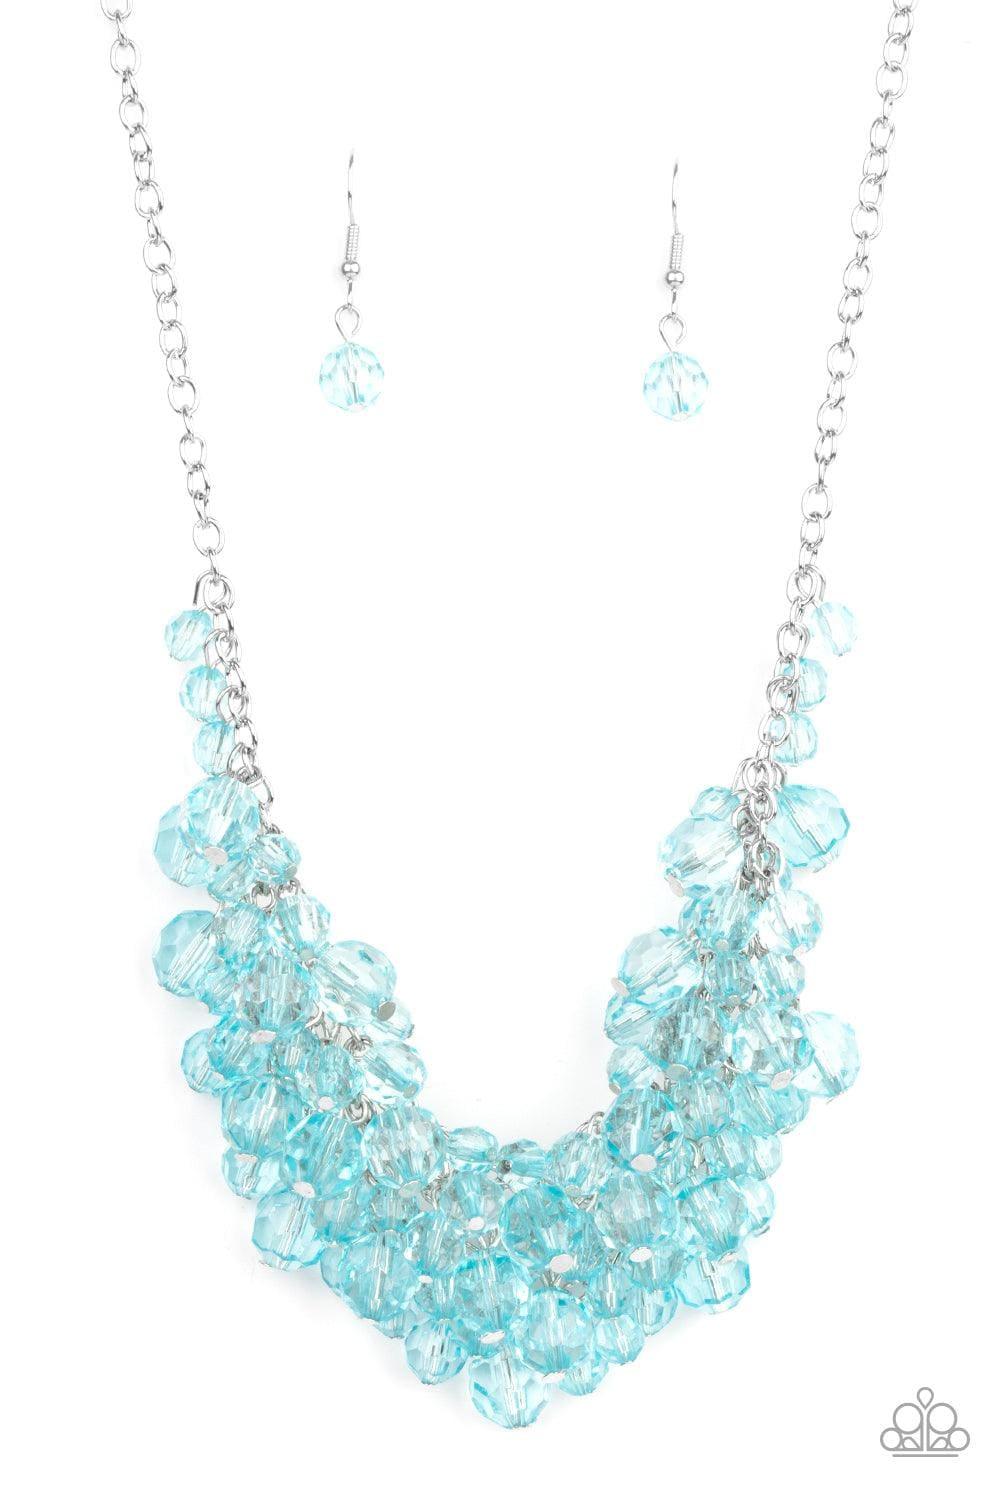 Paparazzi Accessories - Let The Festivities Begin - Blue Necklace - Bling by JessieK